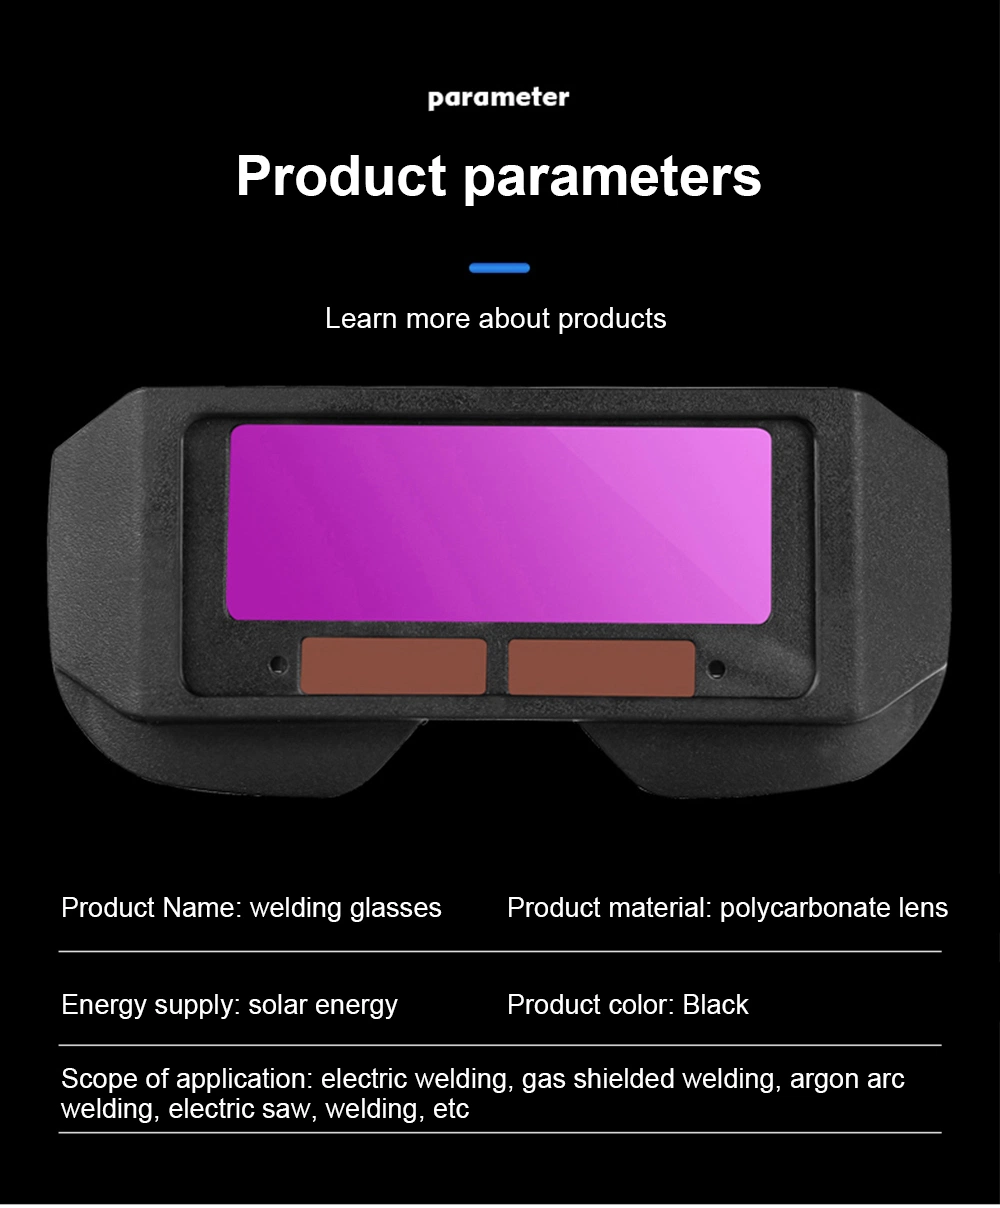 Solar Power and Lithium Battery Auto Darkening Welding Safety Glasses for Welding Working Protection